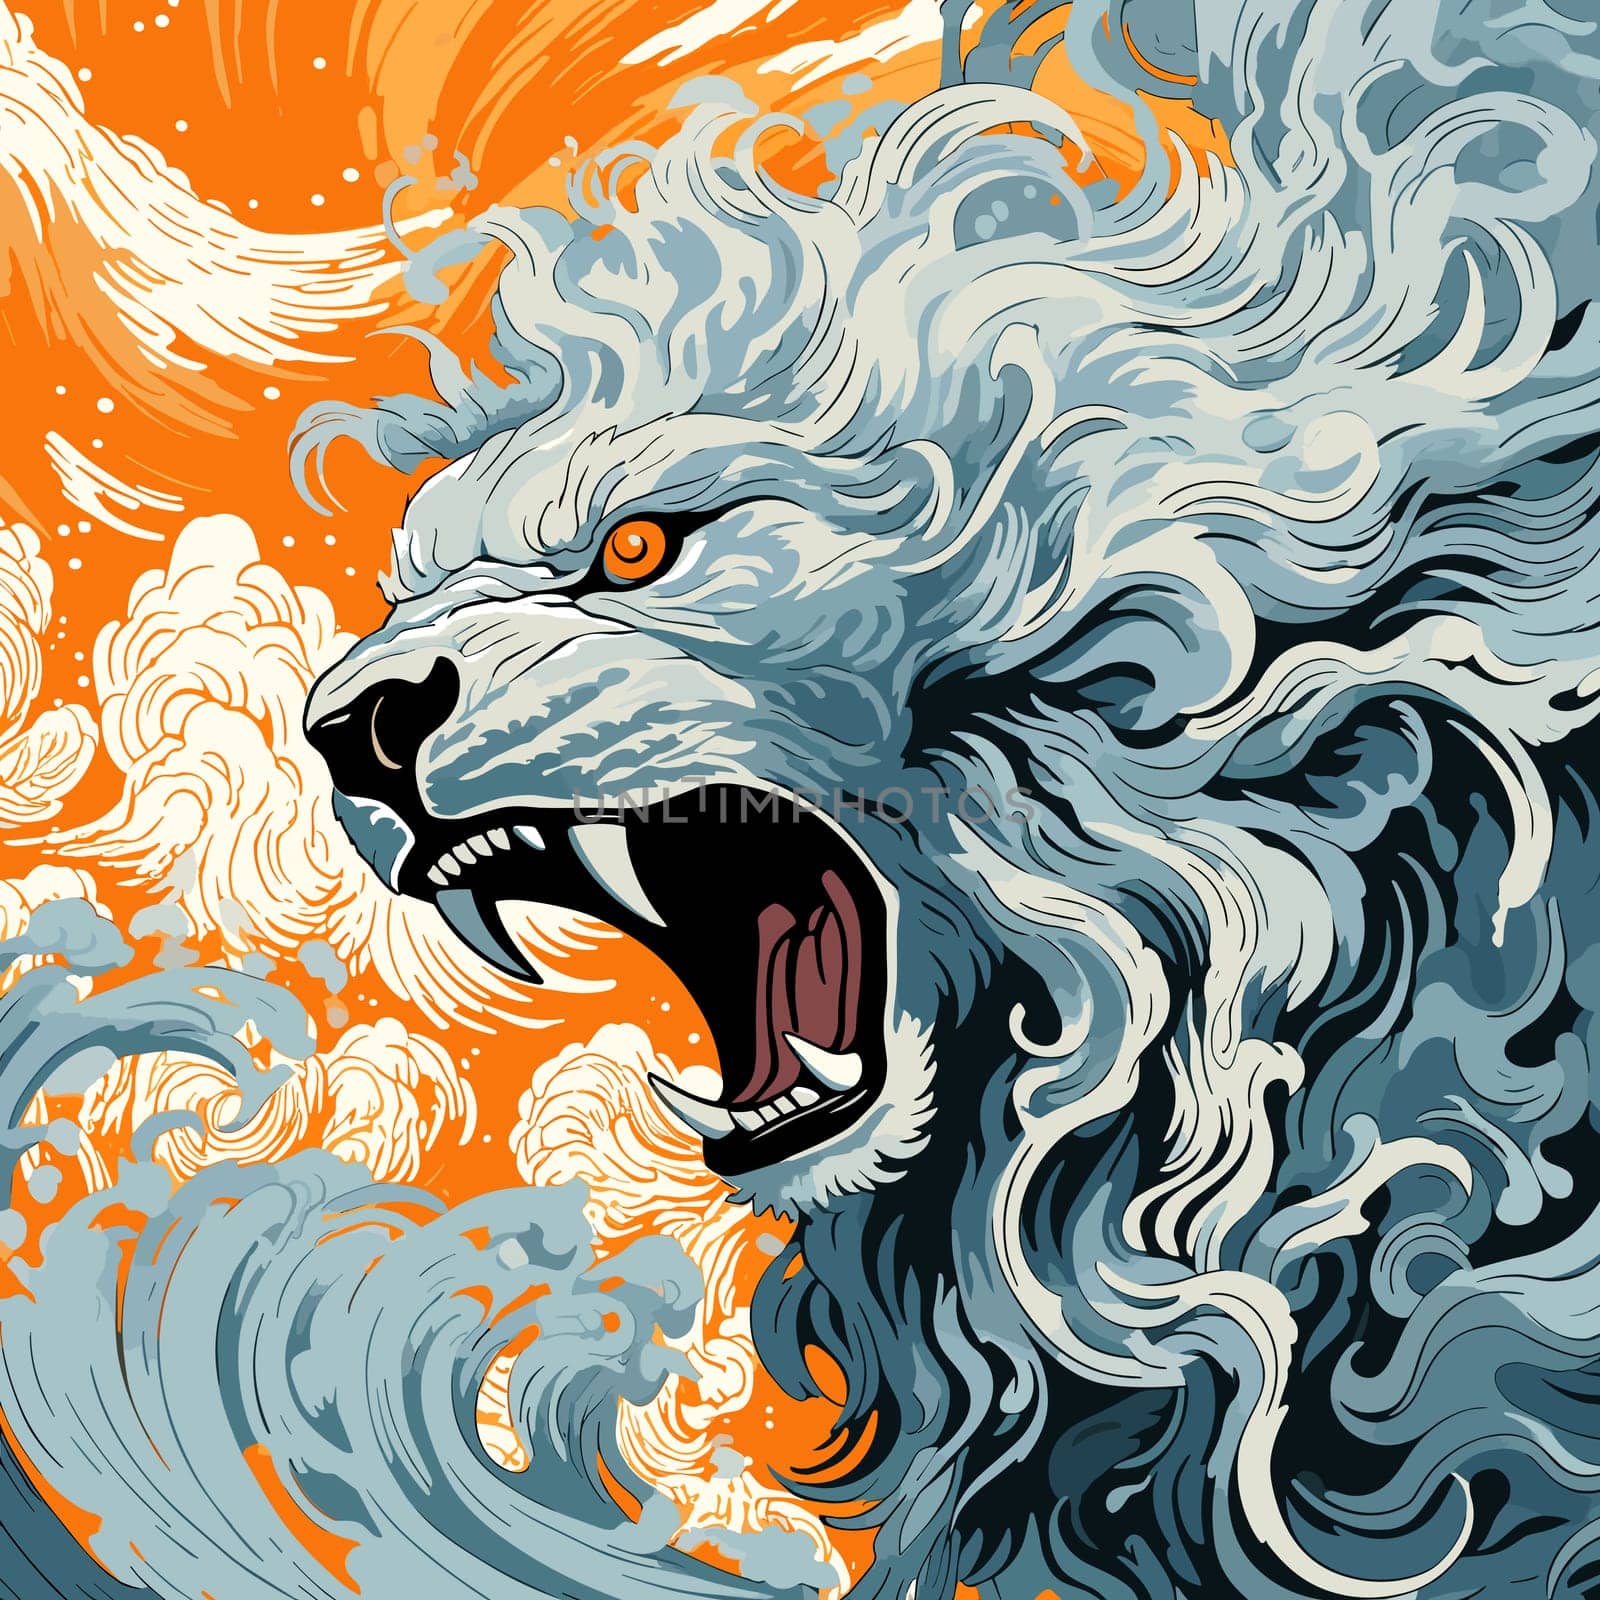 A vibrant portrait of the lion king of beasts in a psychedelic vector pop art style. Graphic design element and template for t-shirt print, sticker, poster, etc.